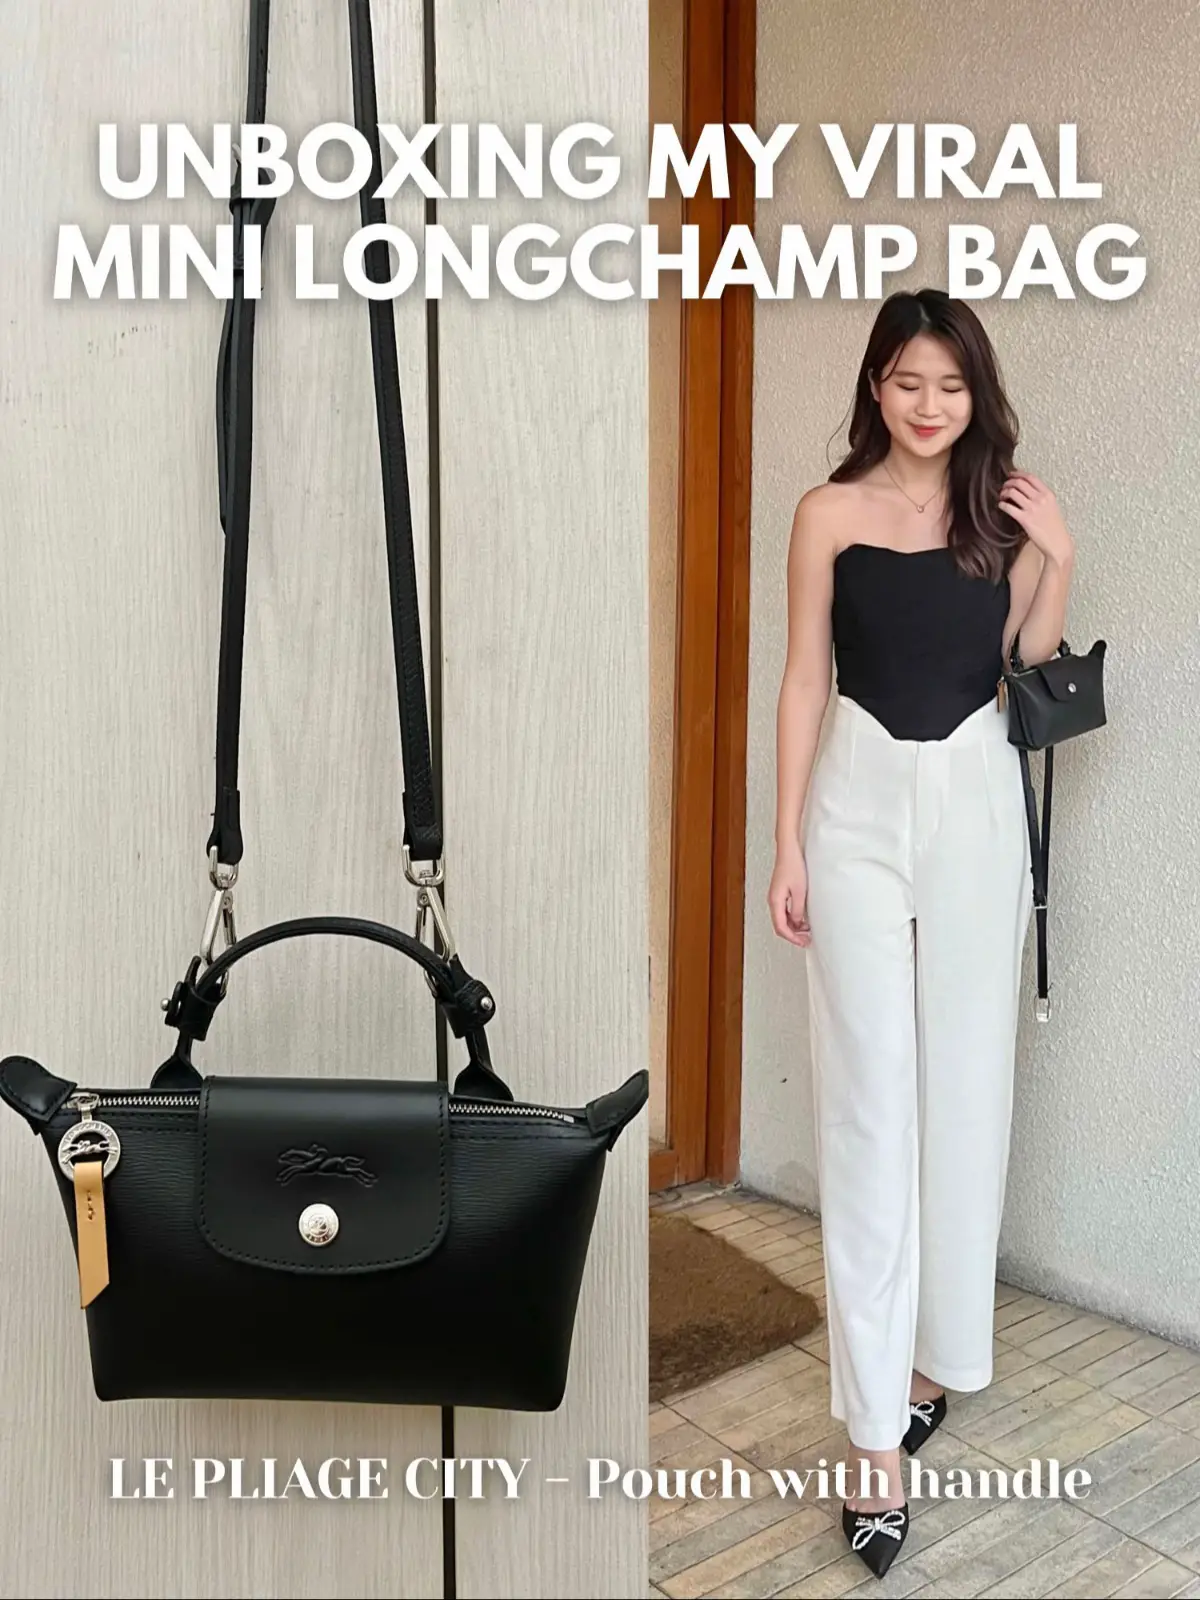 MINI LONGCHAMP BAG! unboxing + review with me! 🥰👜✨